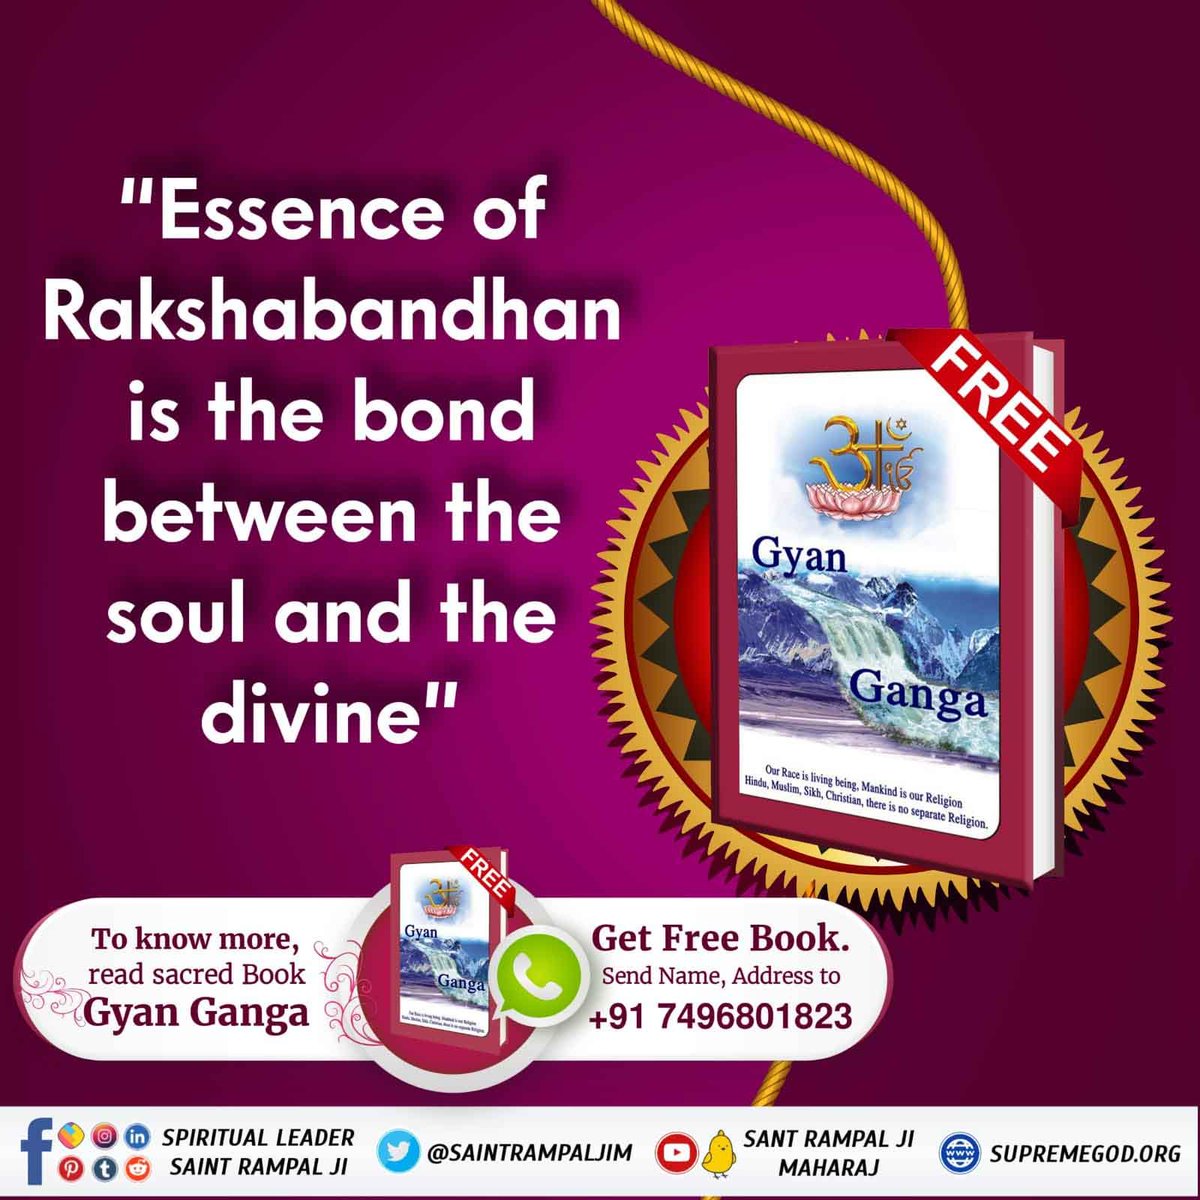 'Essence of
 Rakshabandhan 
is the bond 
between the 
 soul and the divine'
#GodMorningWednesday
#अविनाशी_परमात्मा_कबीर
💁🏻📖To know more, read sacred Book Gyan Ganga
Get Free Book. Send Name, Address to +91 7496801823